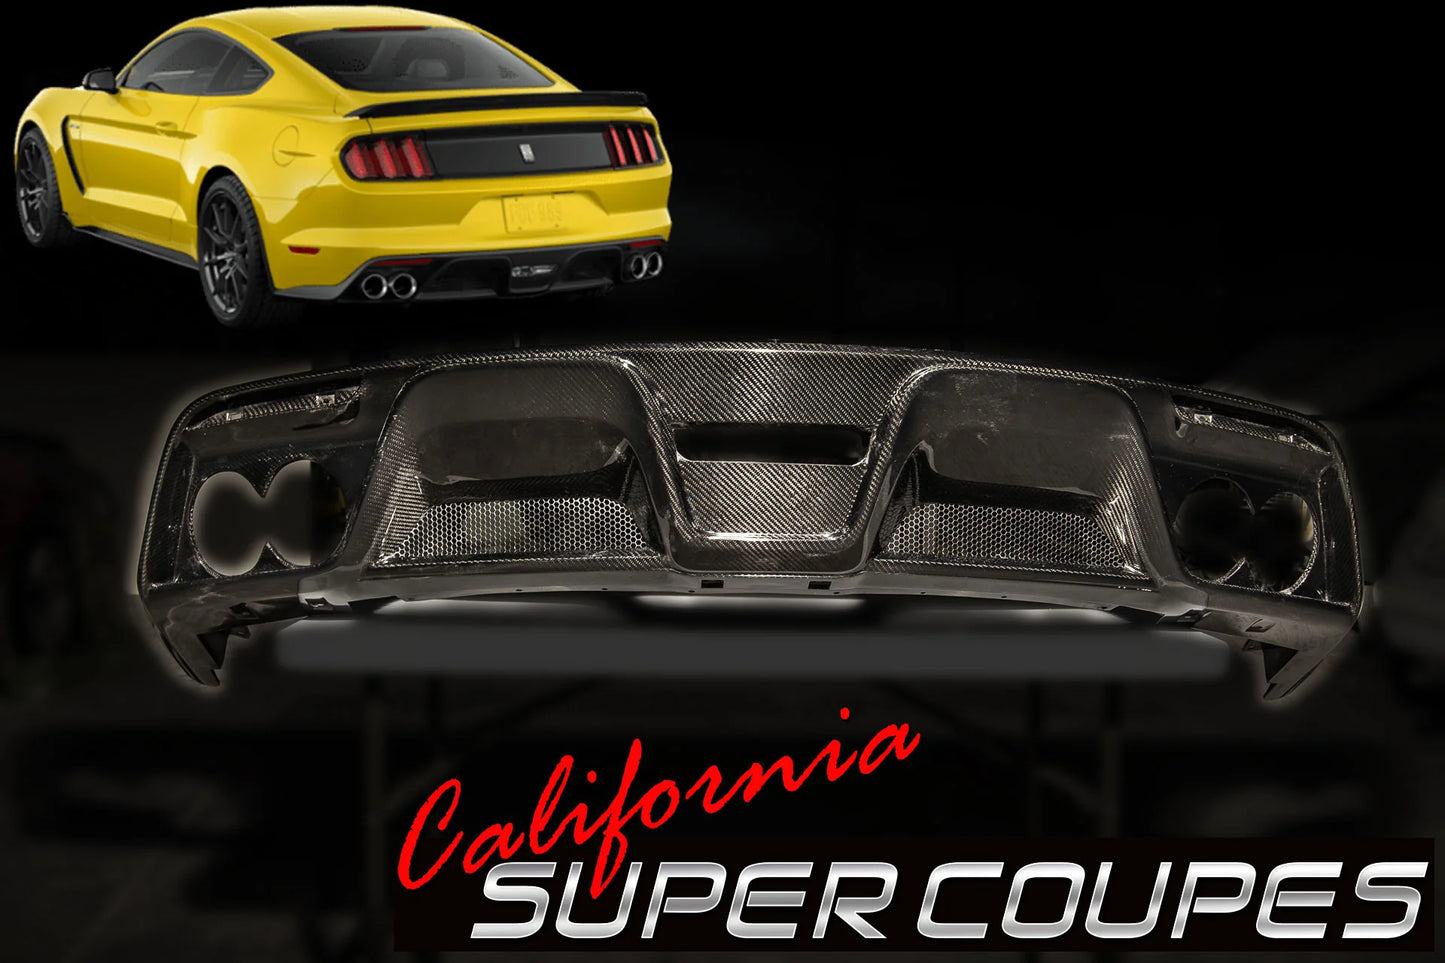 Carbon Fiber GT350 Rear Diffuser Ford Mustang Shelby 2015-2018